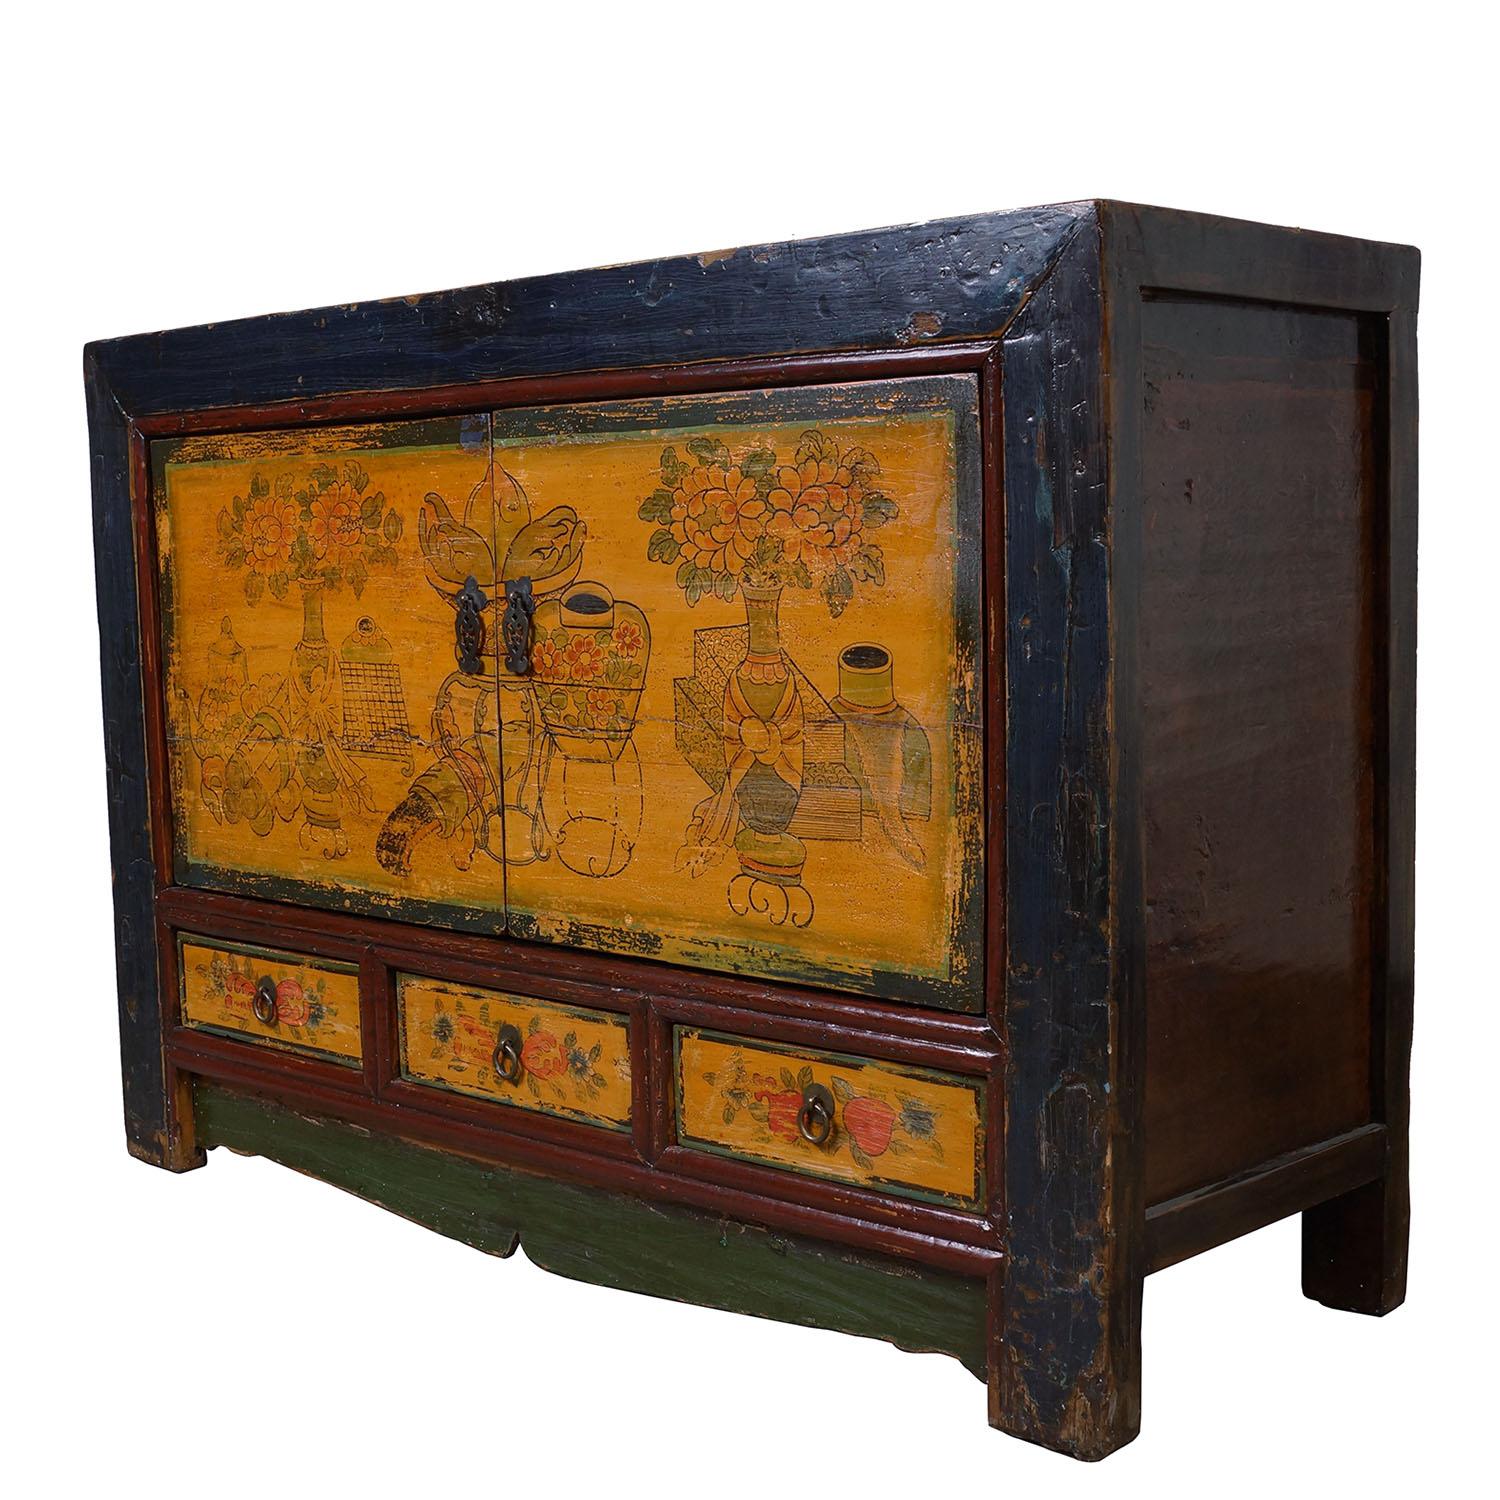 Size: 33in H x 47in W x 16.5in D
Drawer: 3in H x 10.5in W x 10.5in D
Door opening: 17.5in H x 39in W
Origin: Mongolia, China
Circa: 1850 - 1900
Material: Wood
Condition: Original finished, solid wood construction, hand carved, antique